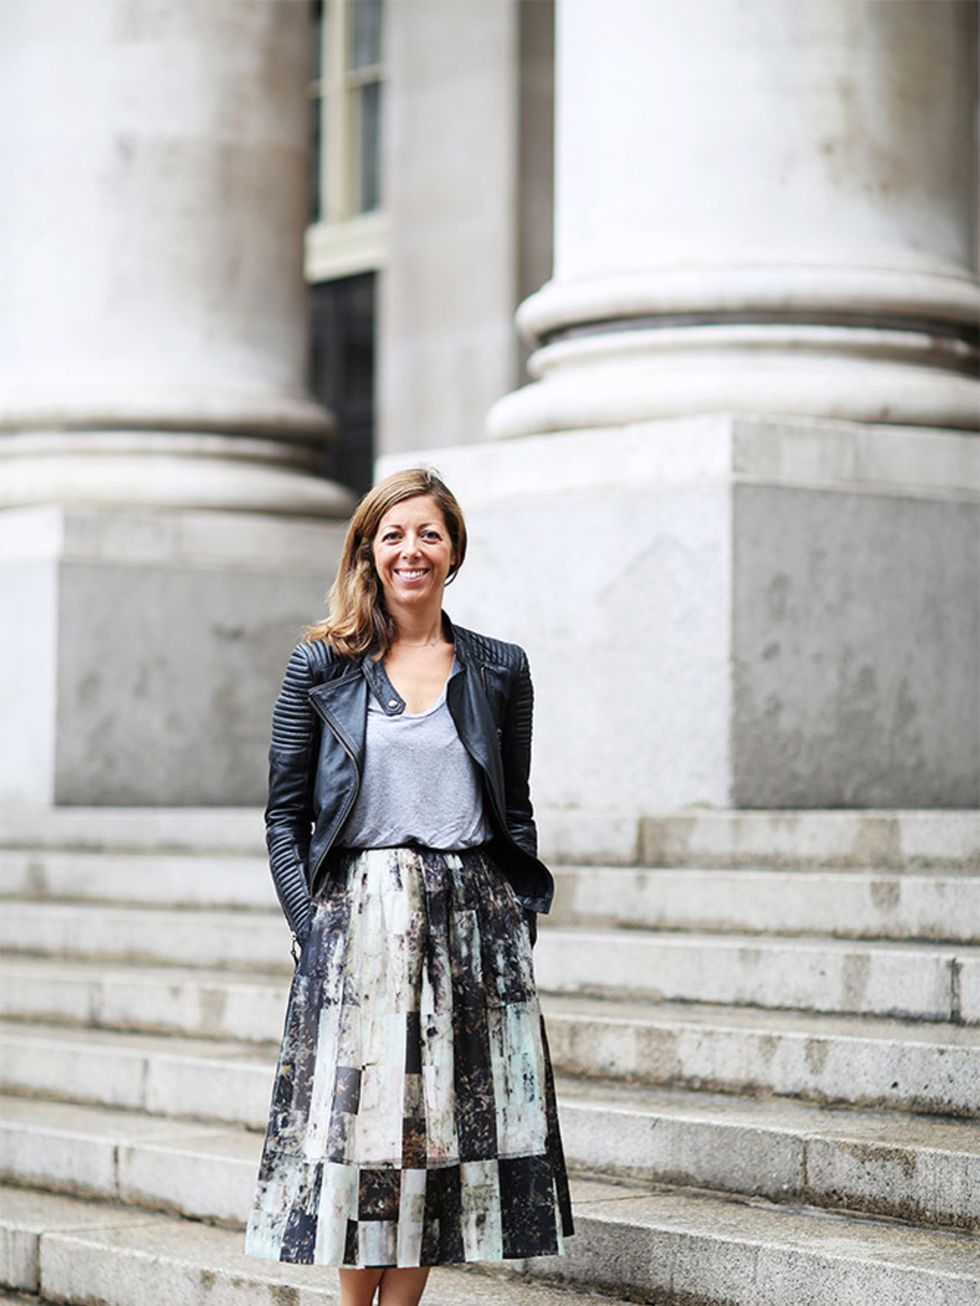 <p>Kirsty Dale  Executive Fashion and Beauty Director</p>

<p>Zara jacket, & Other Stories top, Whistles skirt, Nike trainers.</p>